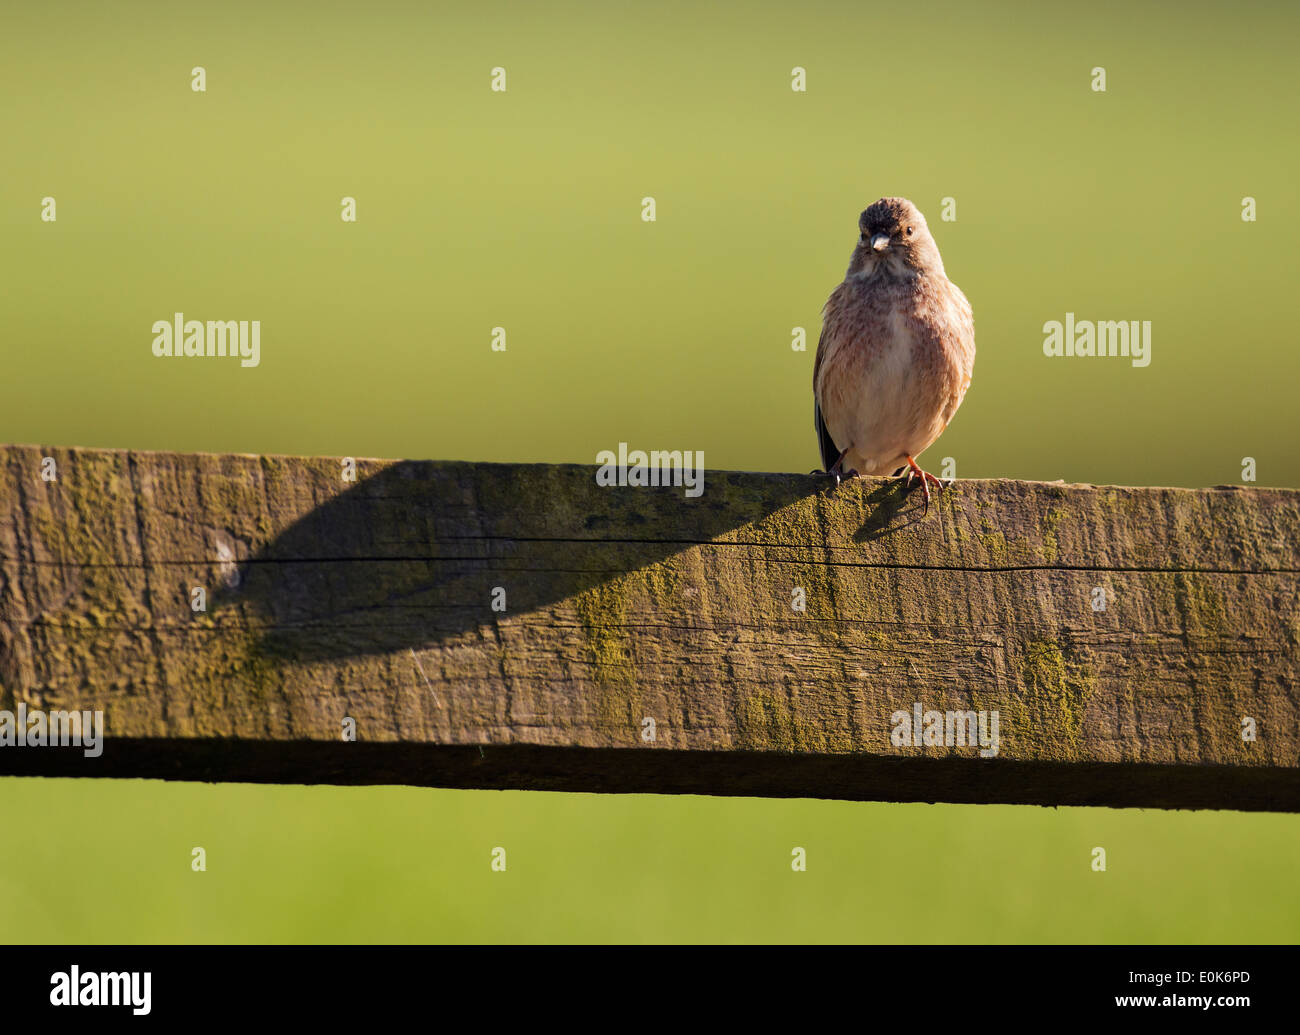 Female Linnet Carduelis cannabina perched on wooden fence Stock Photo